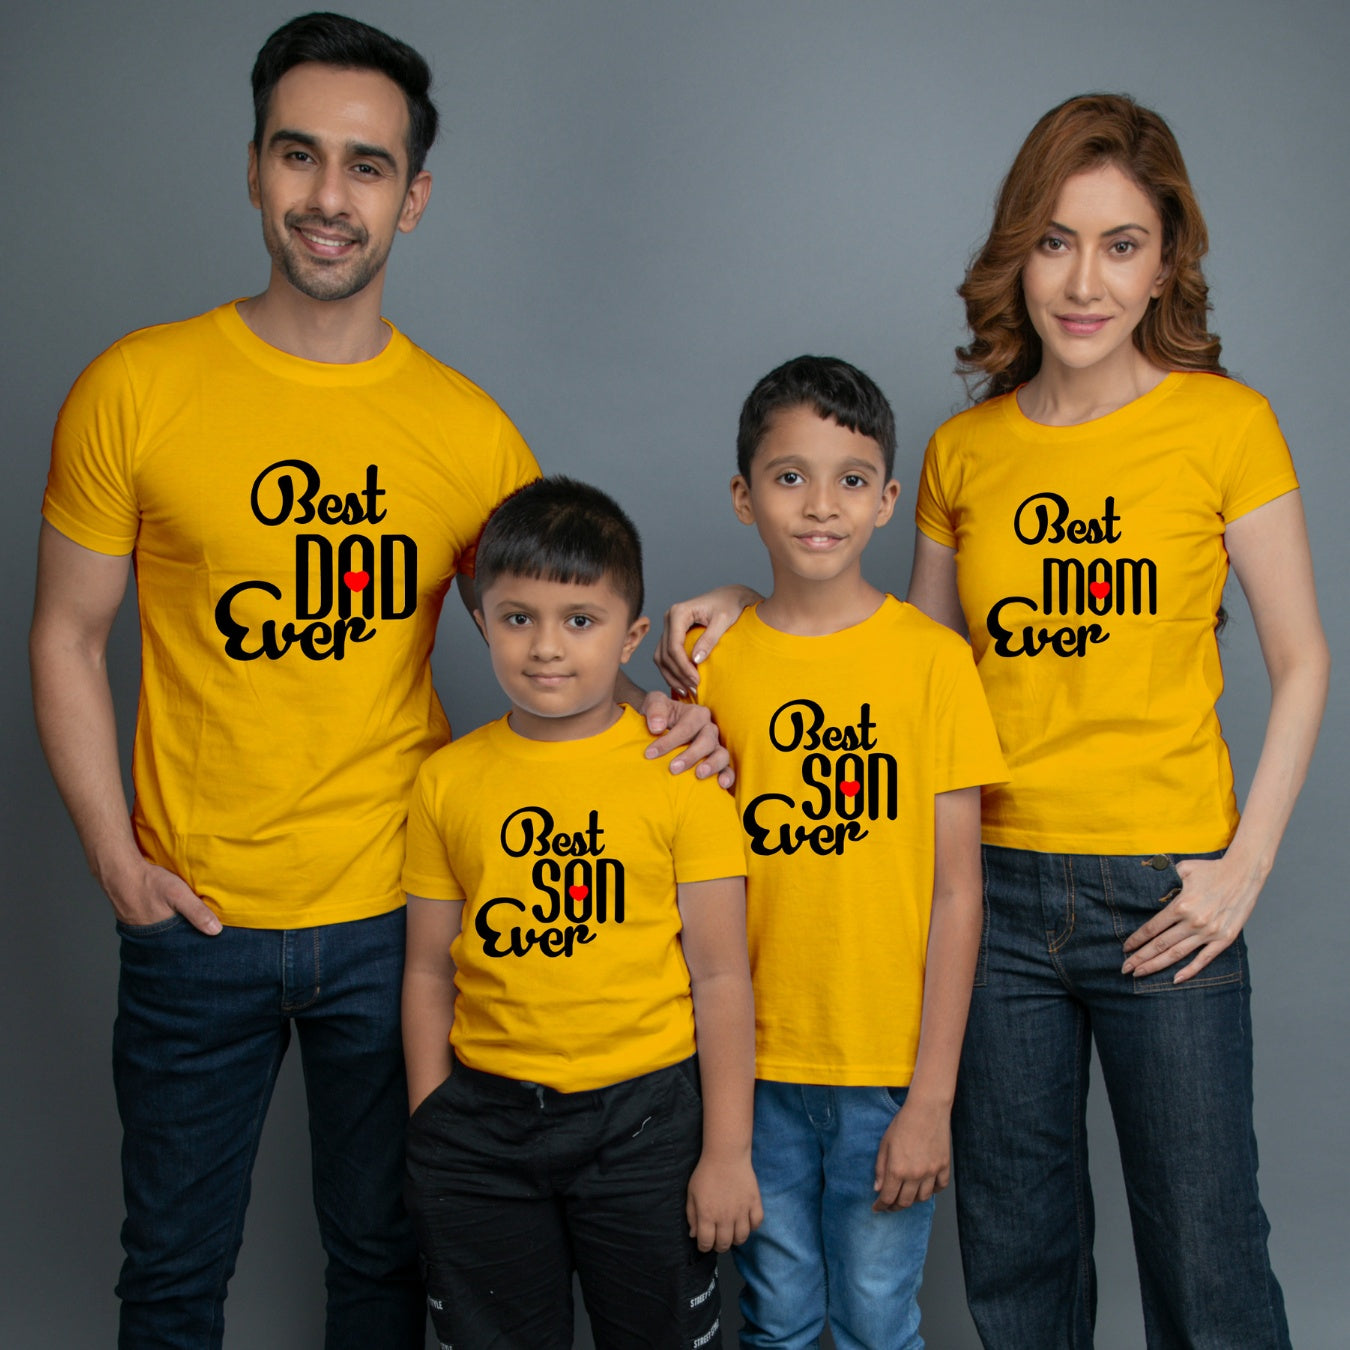 Buy Same T Shirt For Mom Dad & Two Sons Online | Hangout